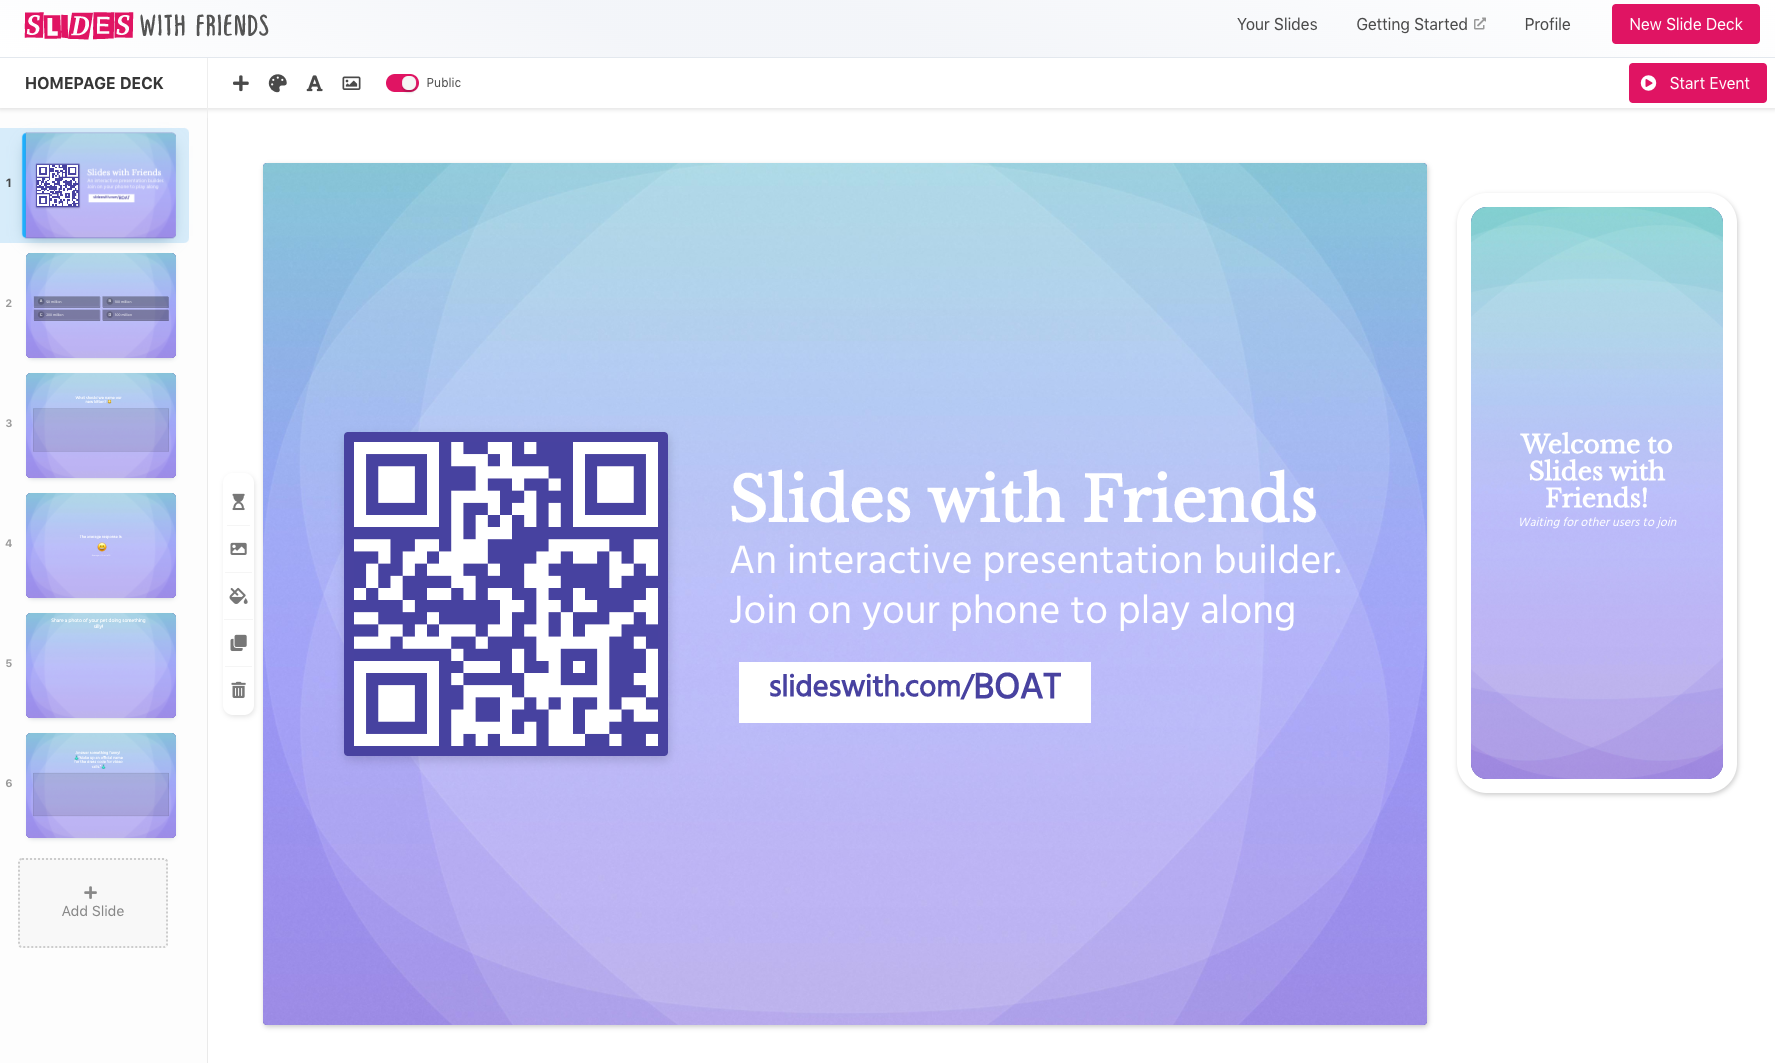 Find pricing, reviews and other details about Slides with Friends